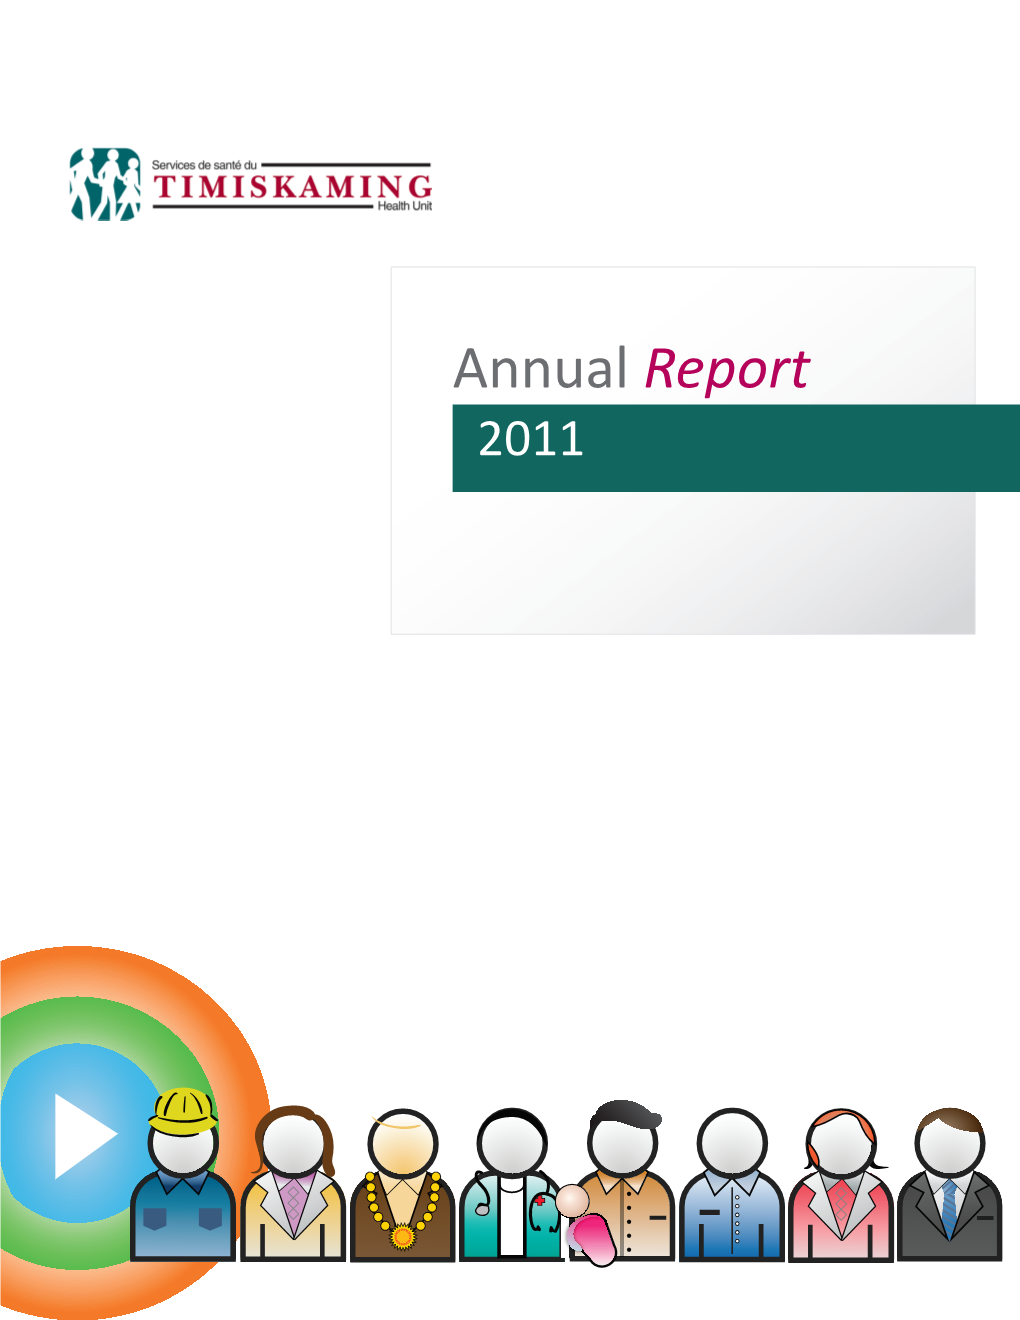 Annual Report 2011 I Had the Pleasure of Joining the Timiskaming Health Unit Part Way Through 2011